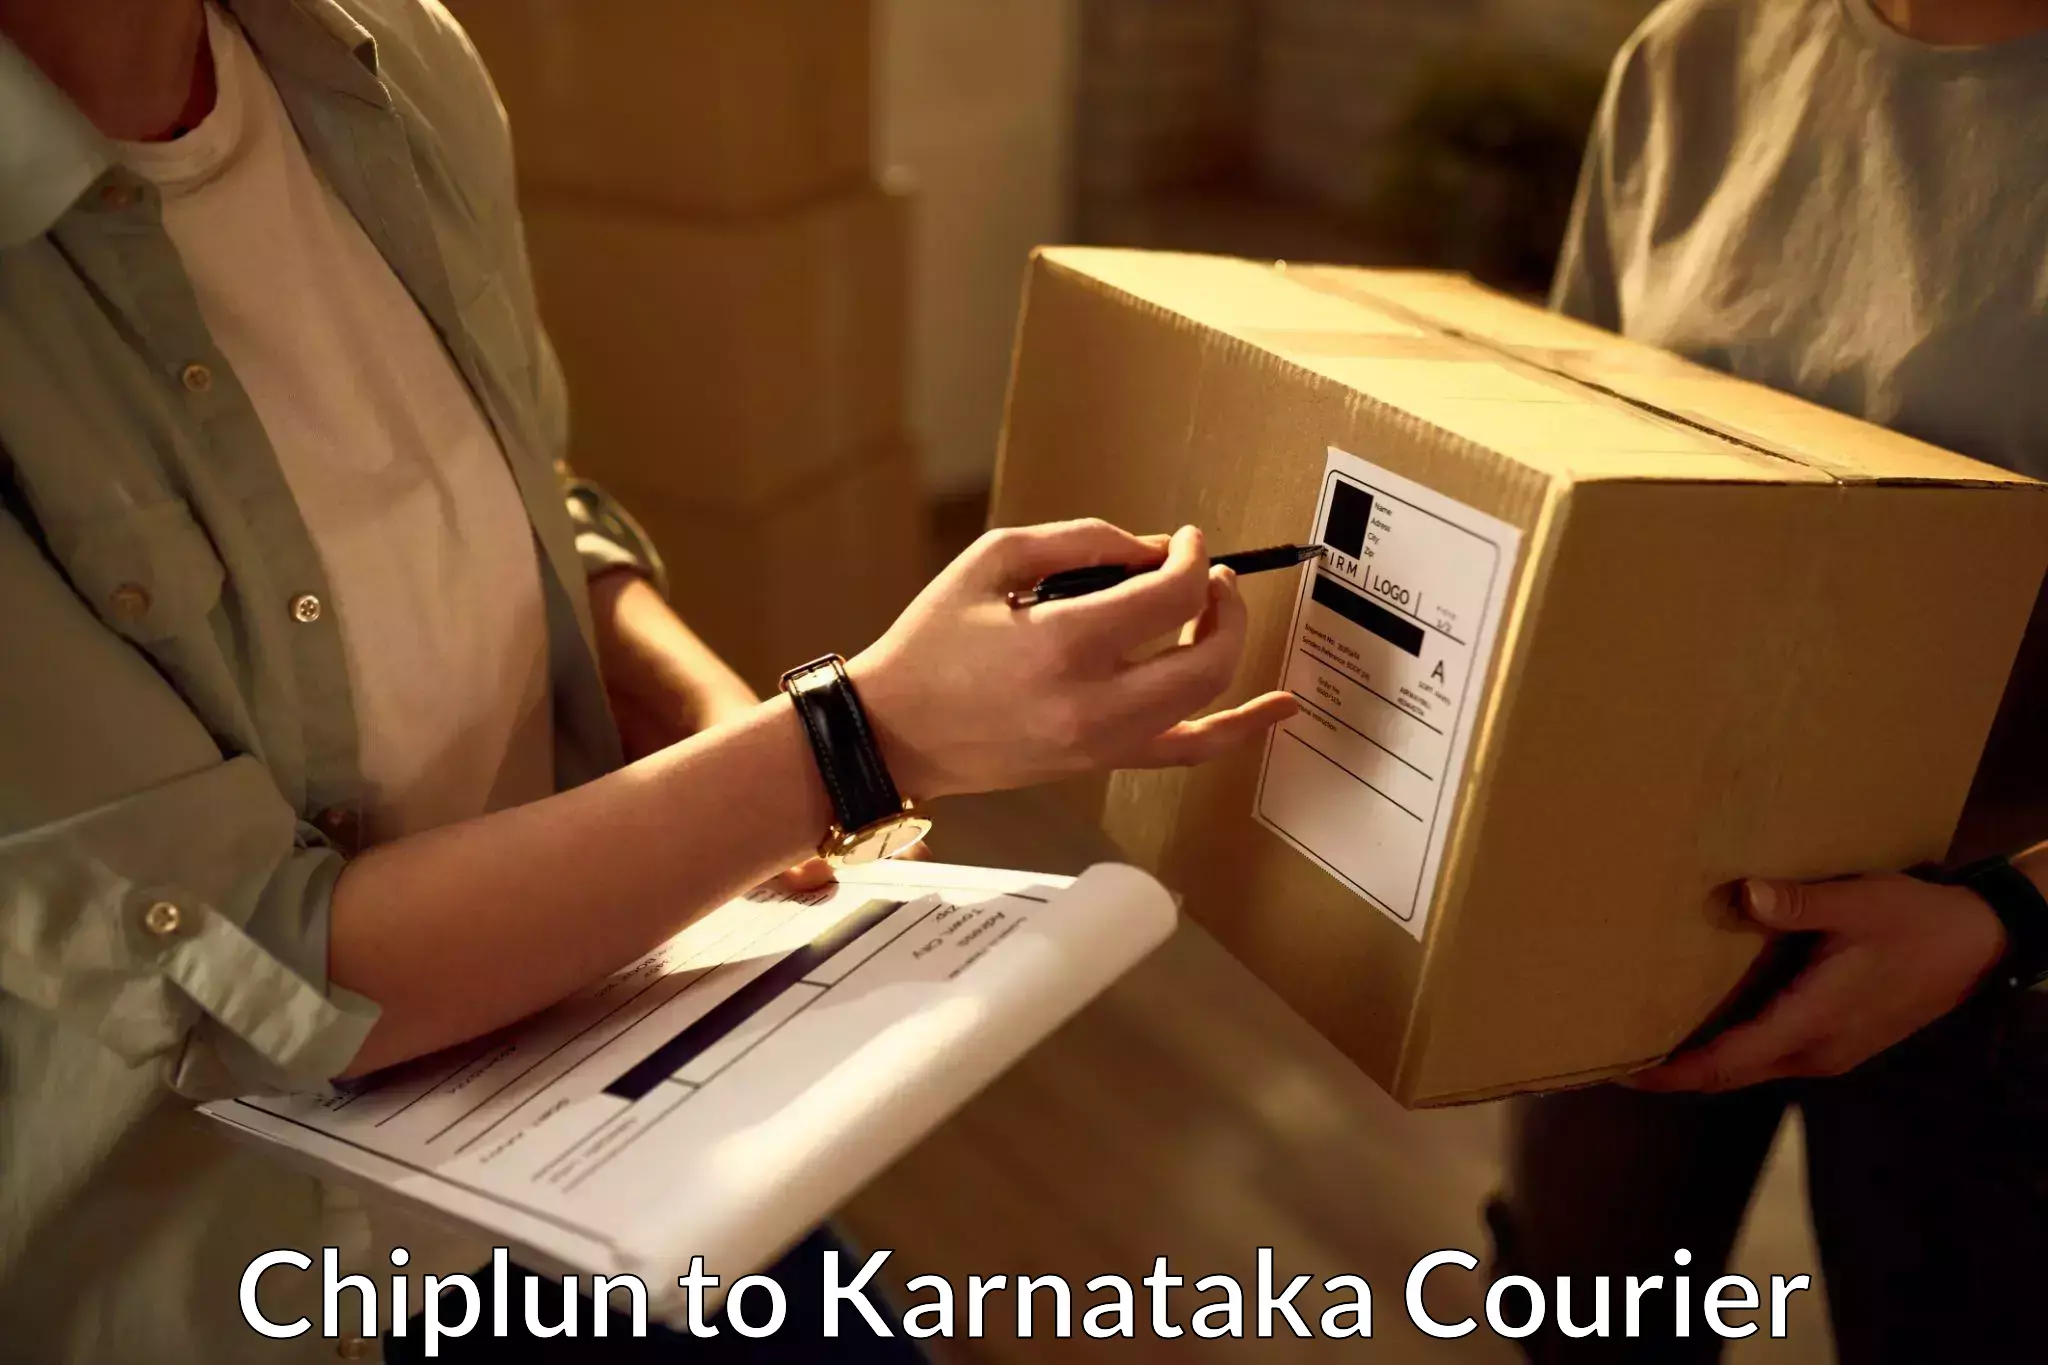 International courier networks Chiplun to Yellapur